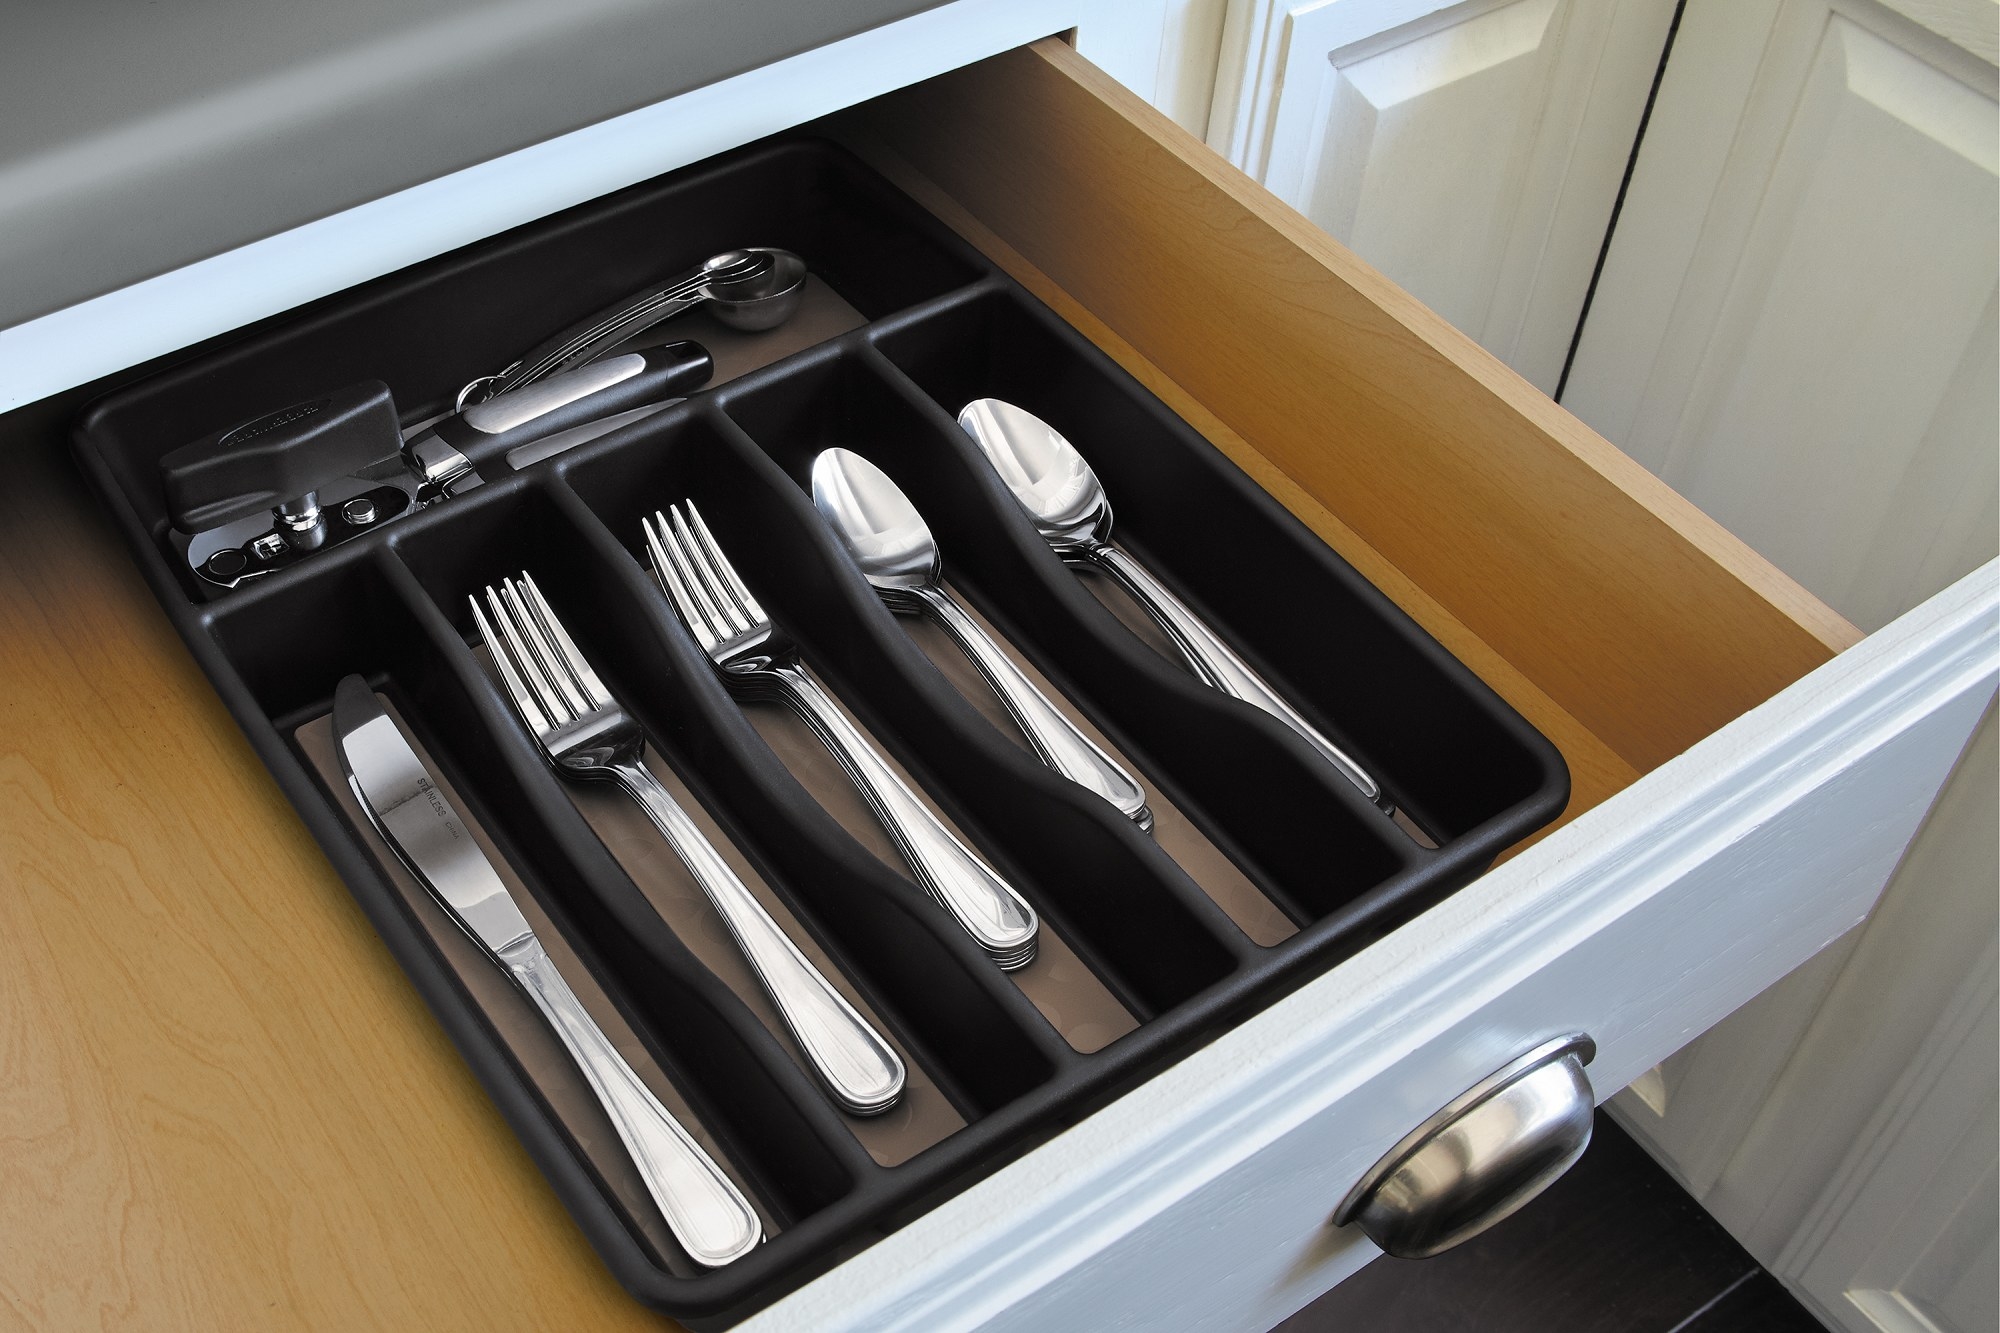 The tray inside a drawer with cutlery neatly organized